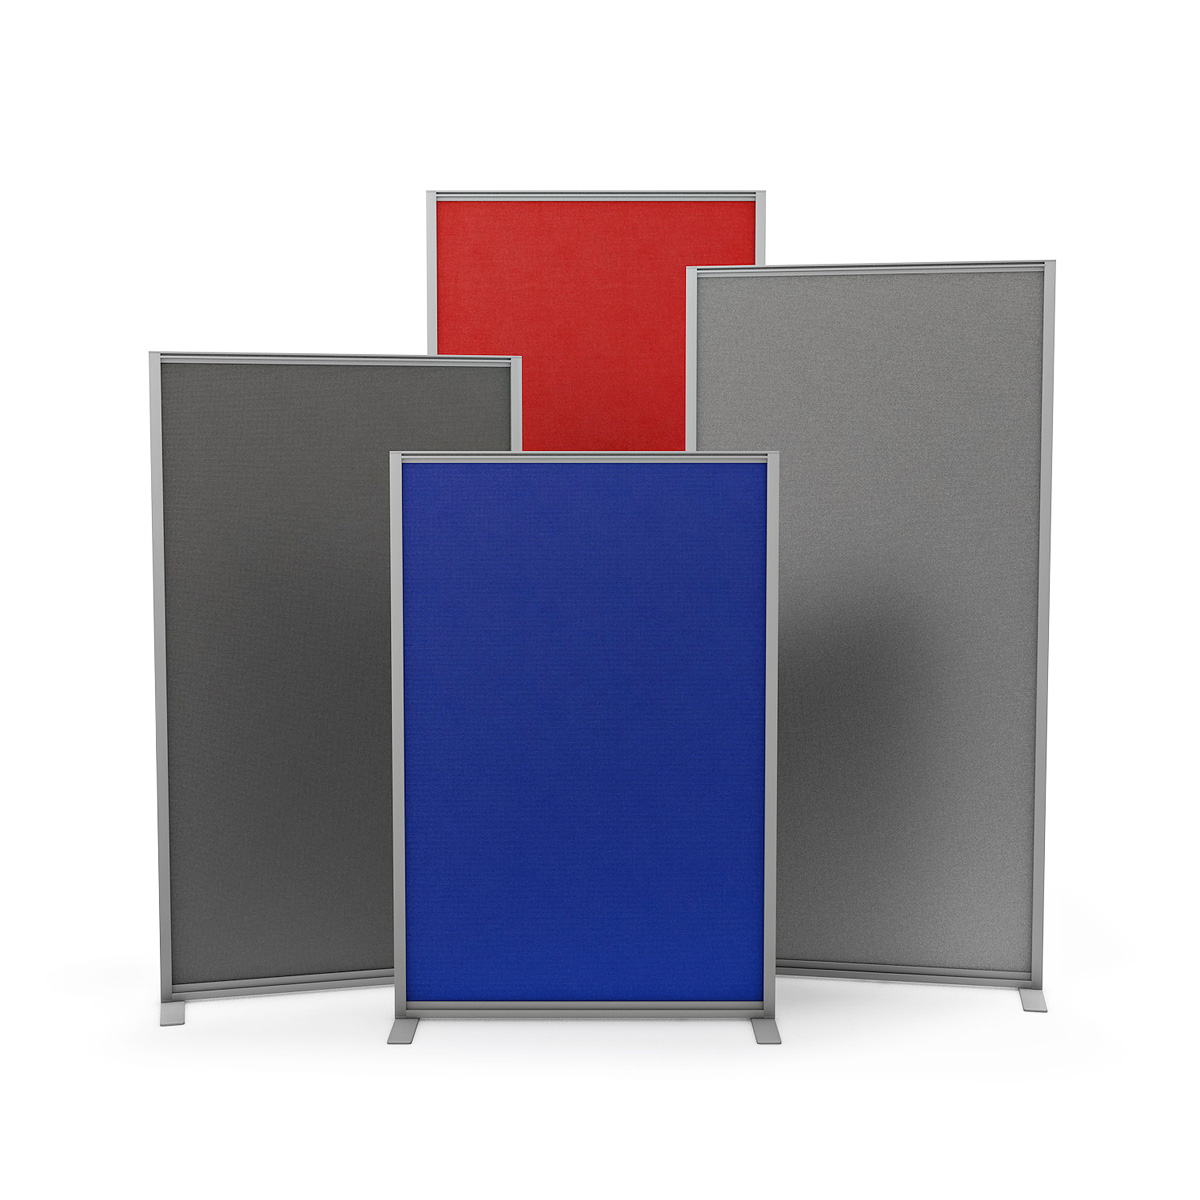 FRONTIER® Acoustic Panel Screens Are Available in a Range of Heights And Widths